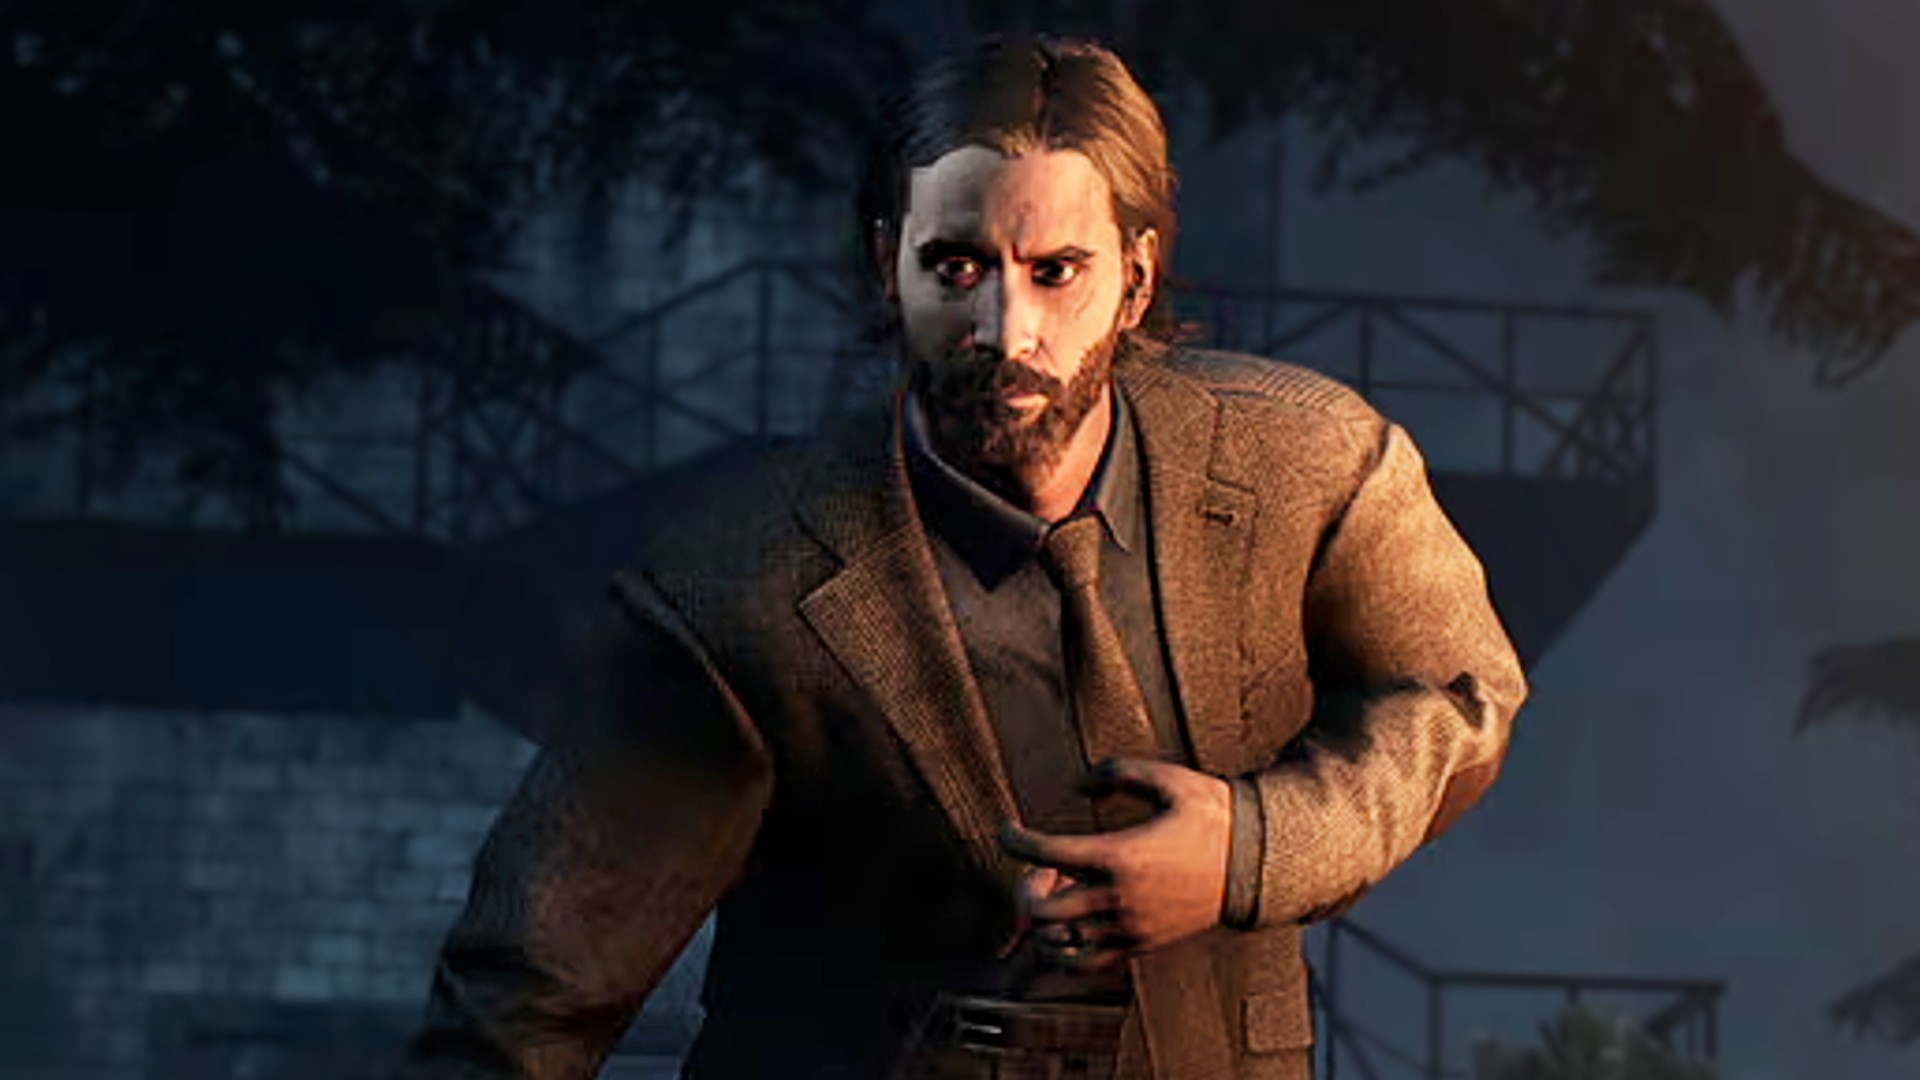 Next DBD update – Alan Wake Chapter release date